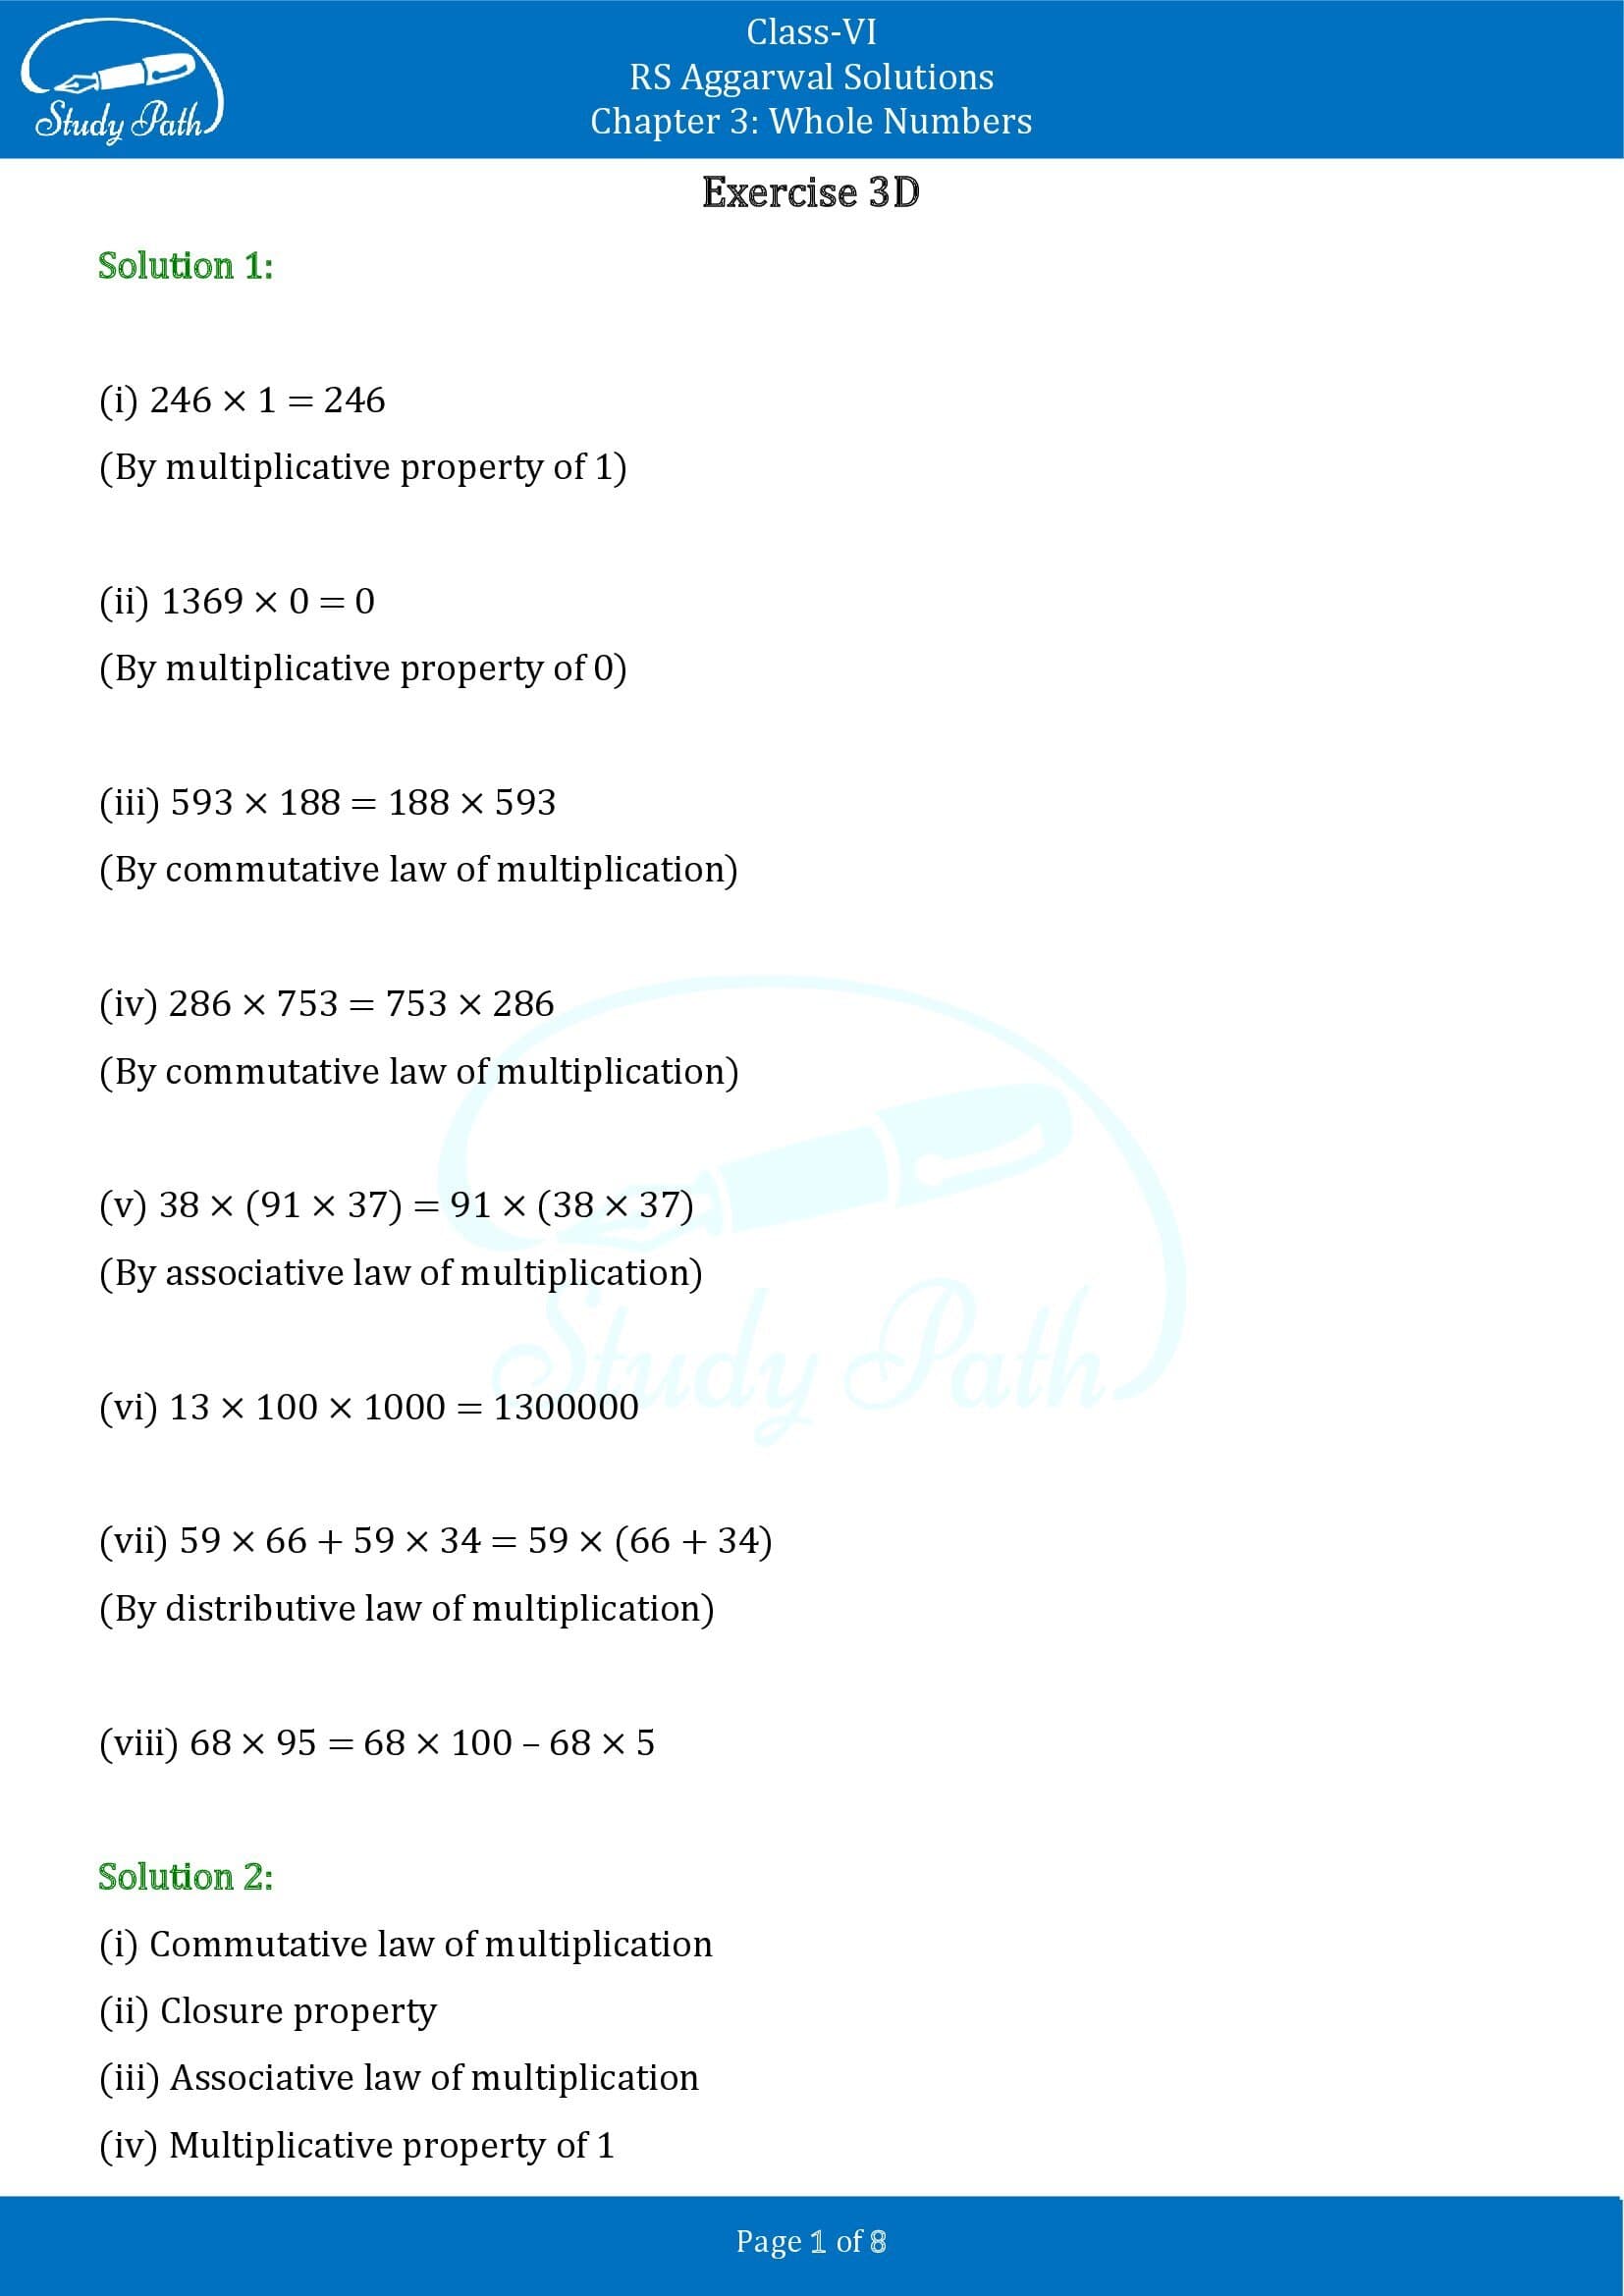 RS Aggarwal Solutions Class 6 Chapter 3 Whole Numbers Exercise 3D 0001